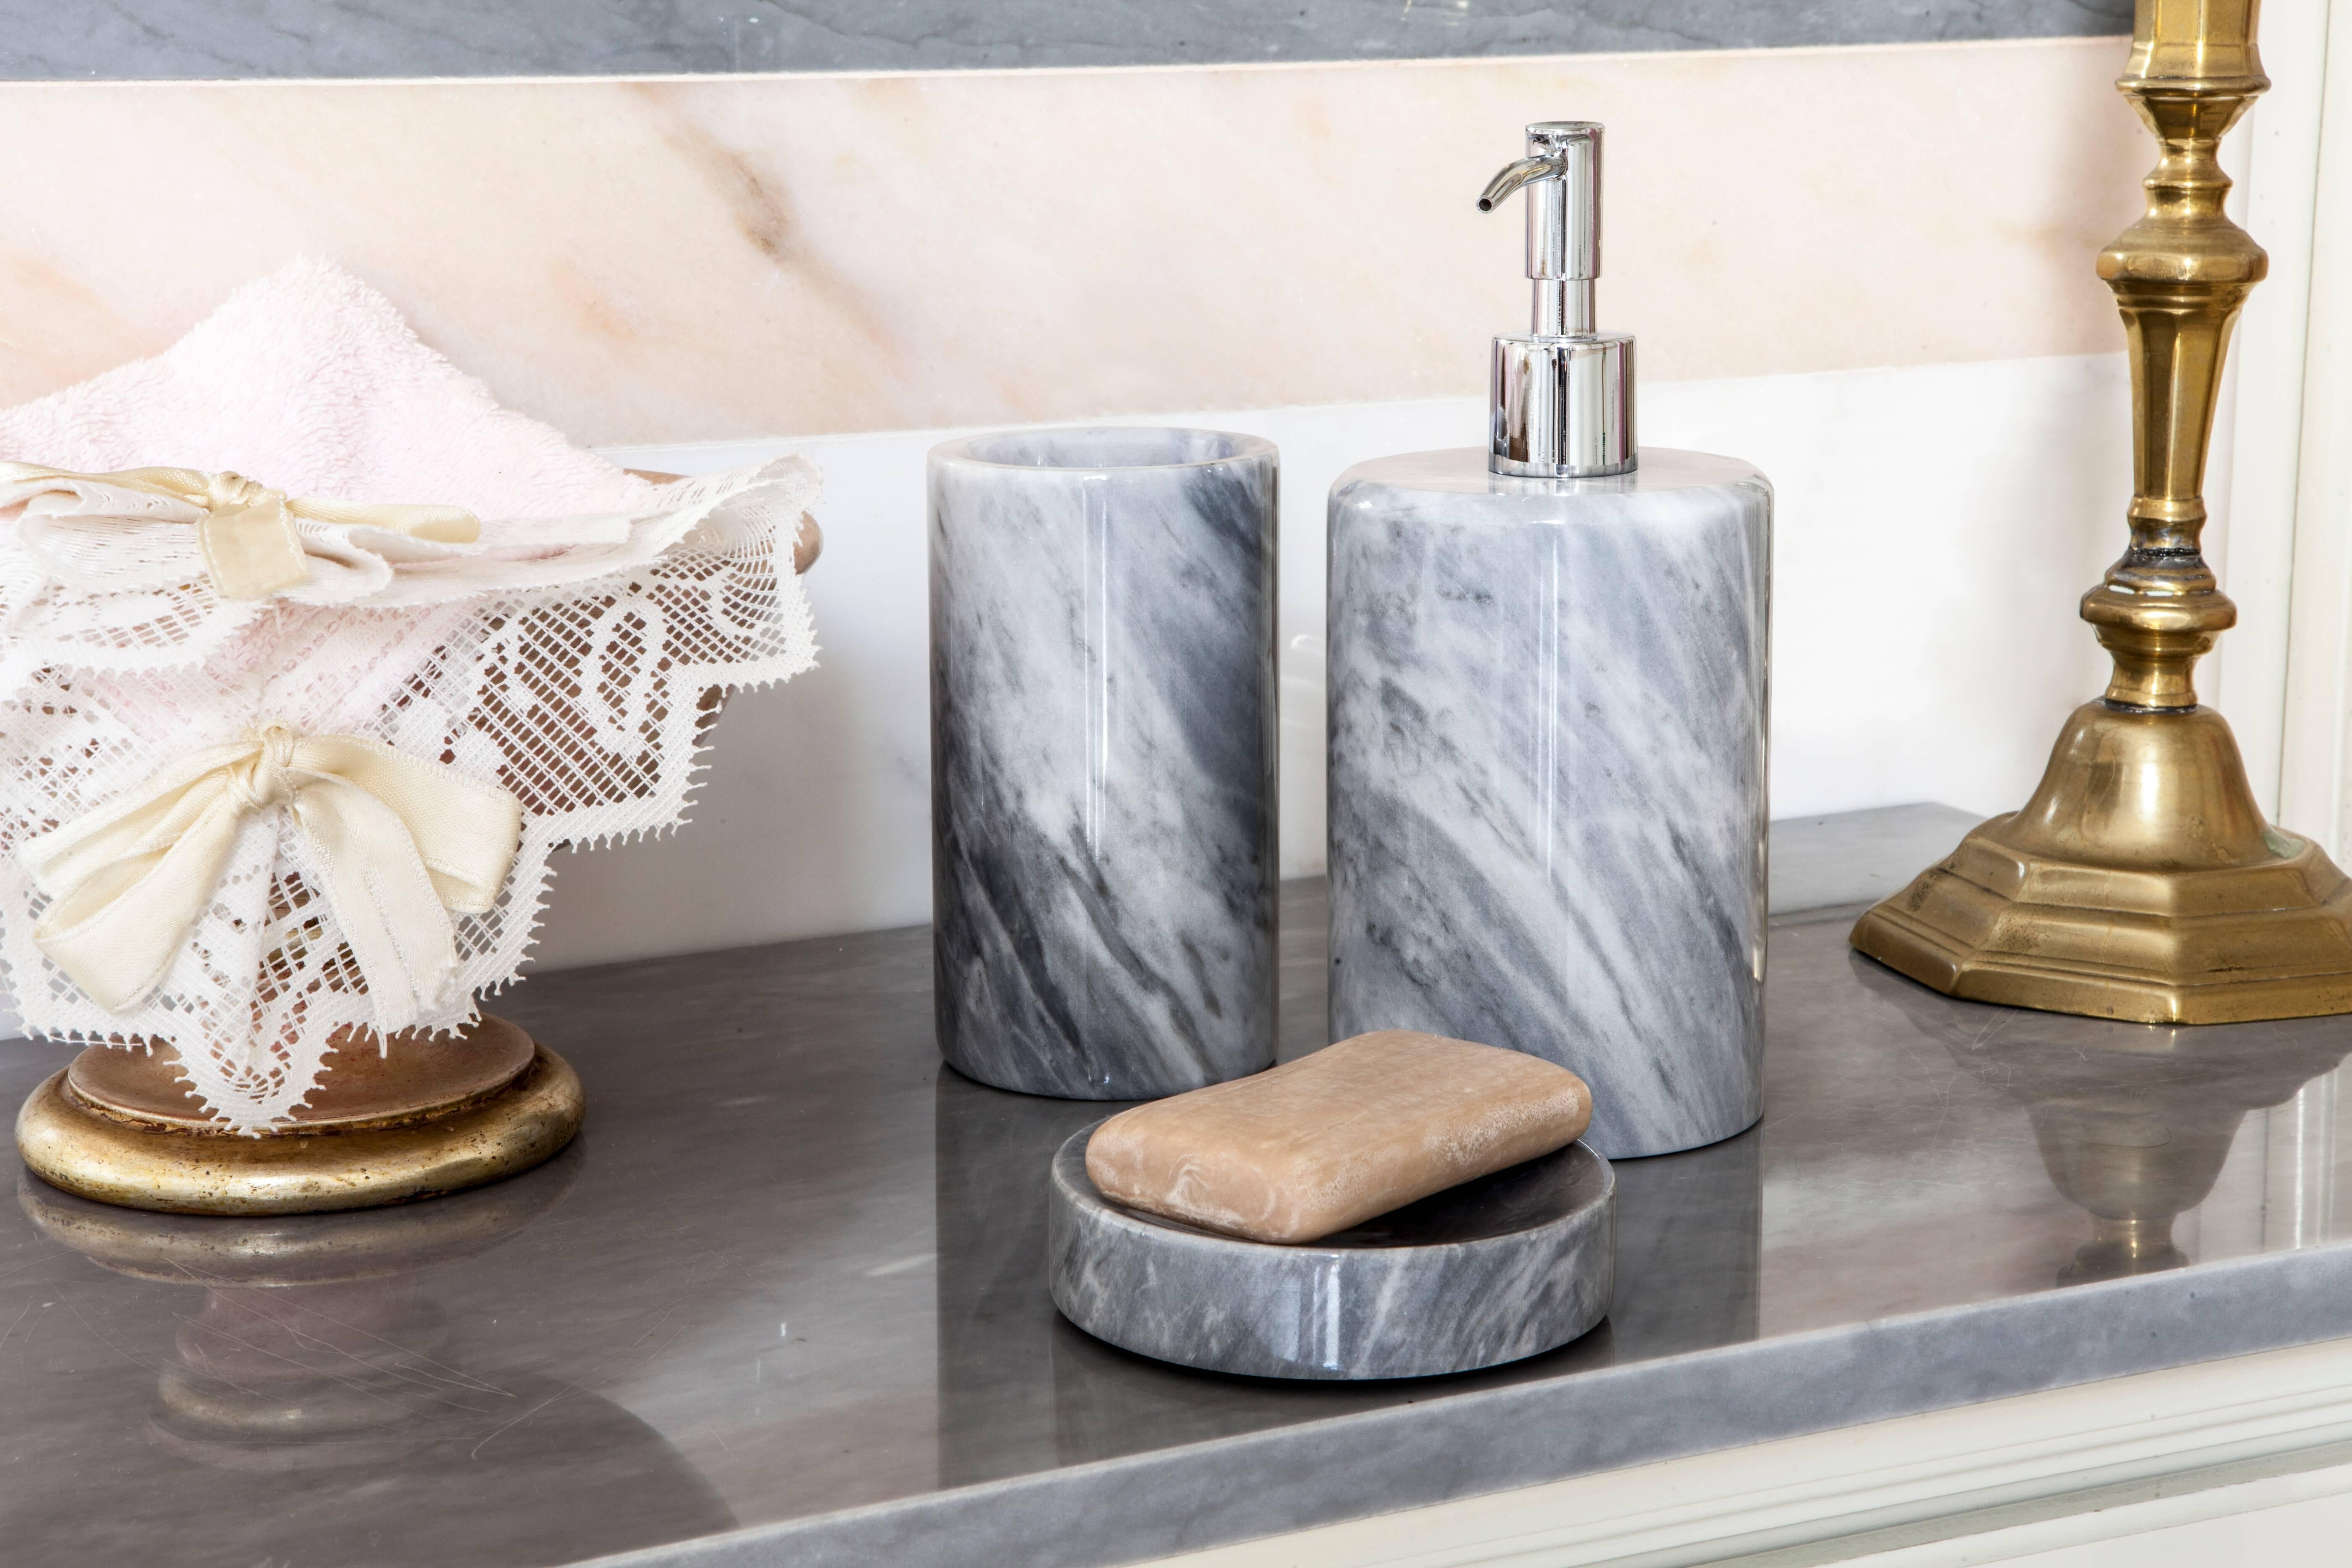 A rounded shape soap dispenser in grey Bardiglio marble.
Each piece is in a way unique (since each marble block is different in veins and shades) and handcrafted in Italy. Slight variations in shape, color and size are to be considered a guarantee